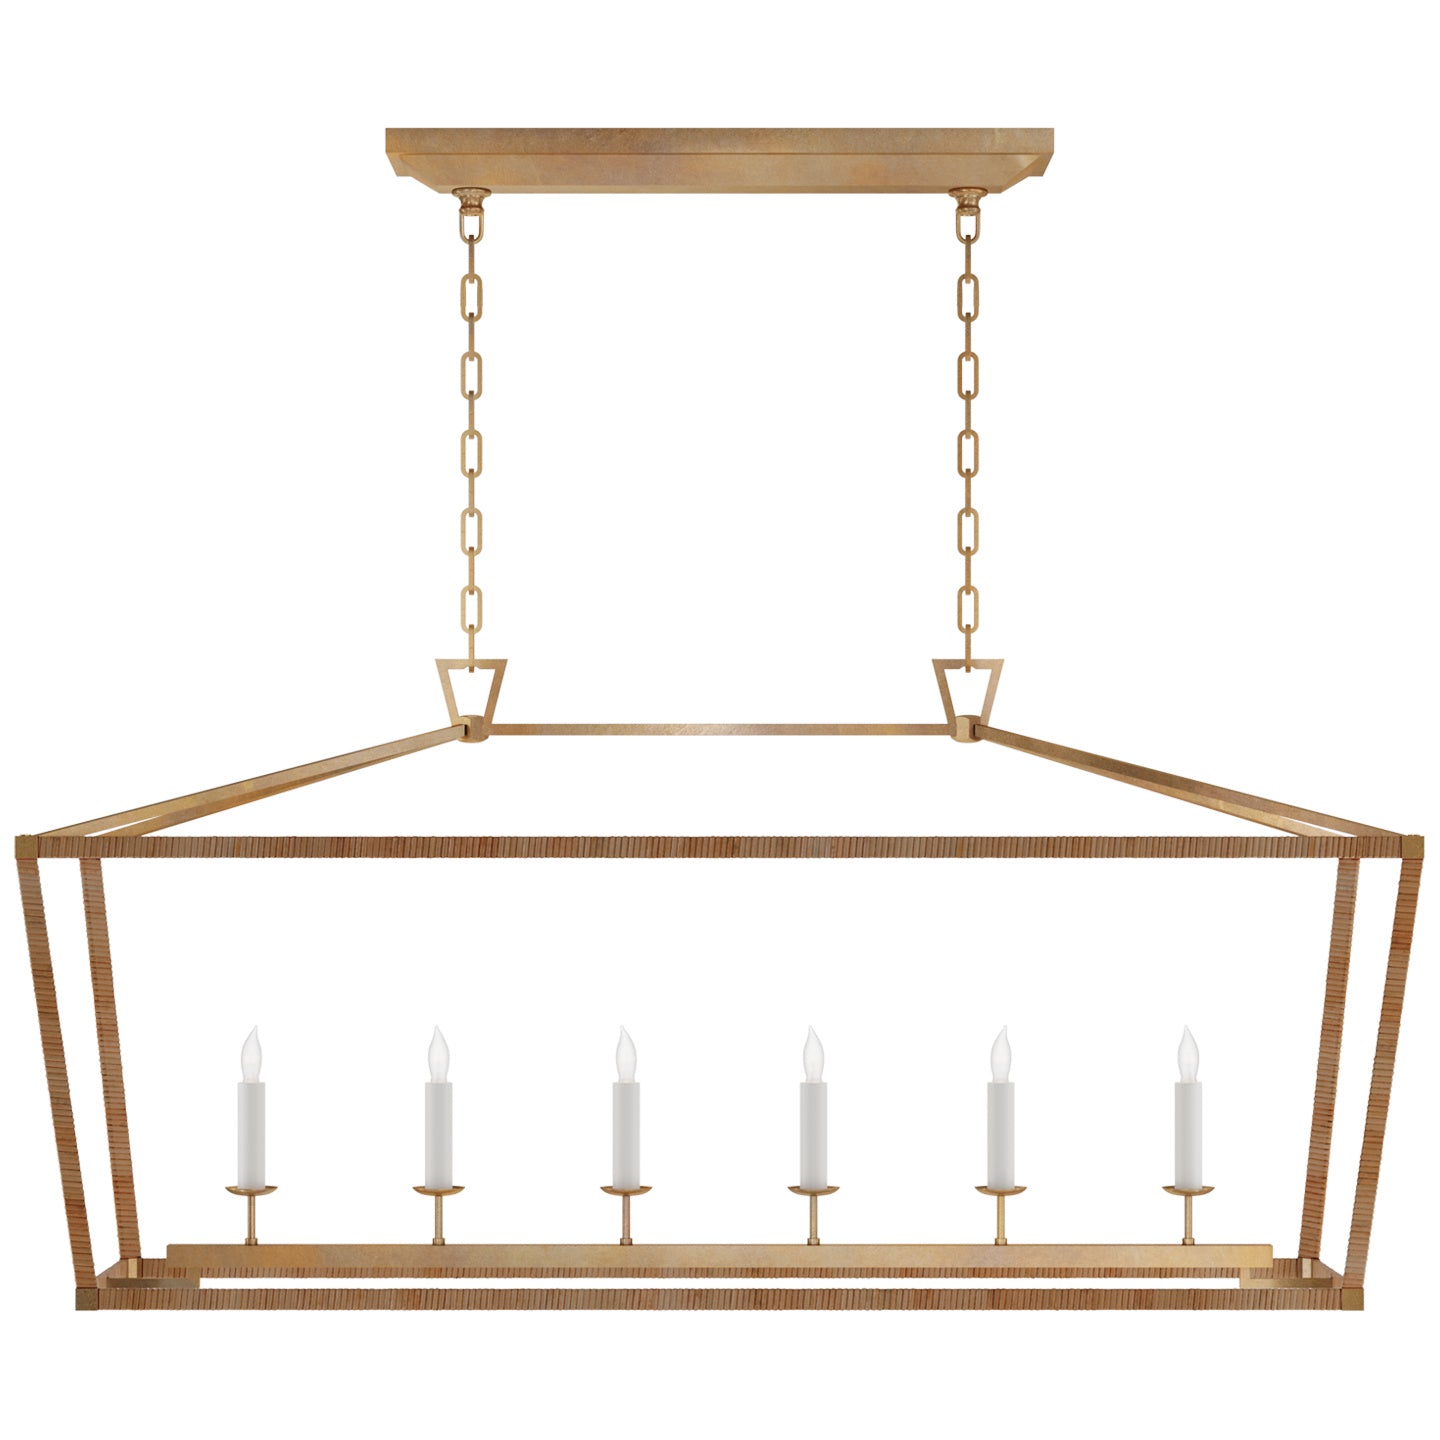 Visual Comfort Signature - CHC 5766AB/NRT - LED Linear Pendant - Darlana Wrapped - Antique-Burnished Brass and Natural Rattan